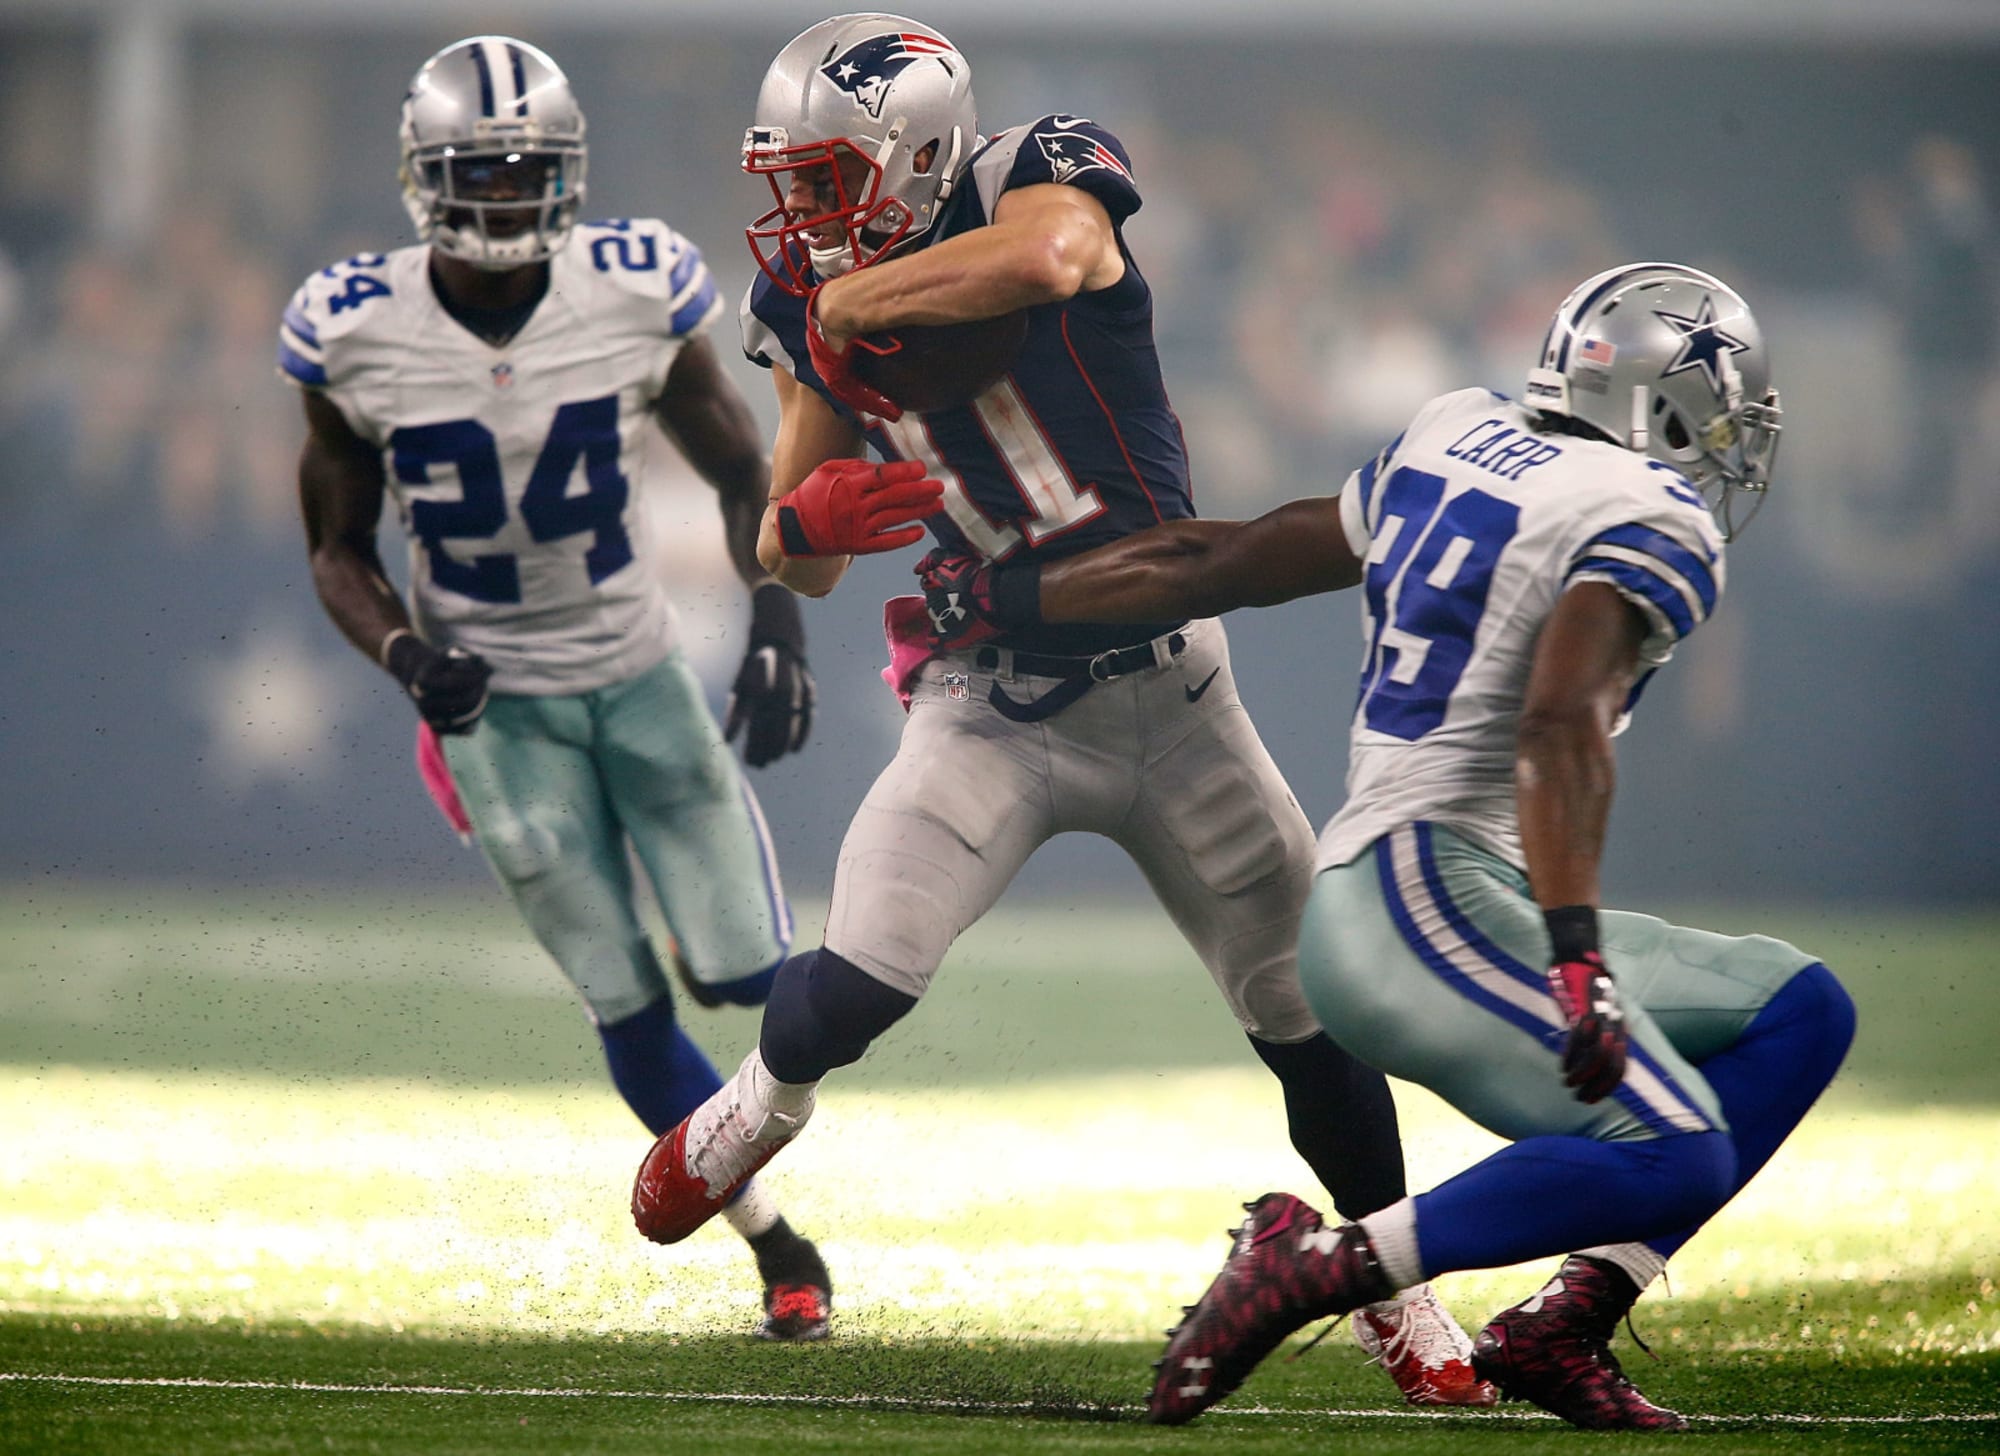 Final thoughts on New England Patriots versus Dallas Cowboys